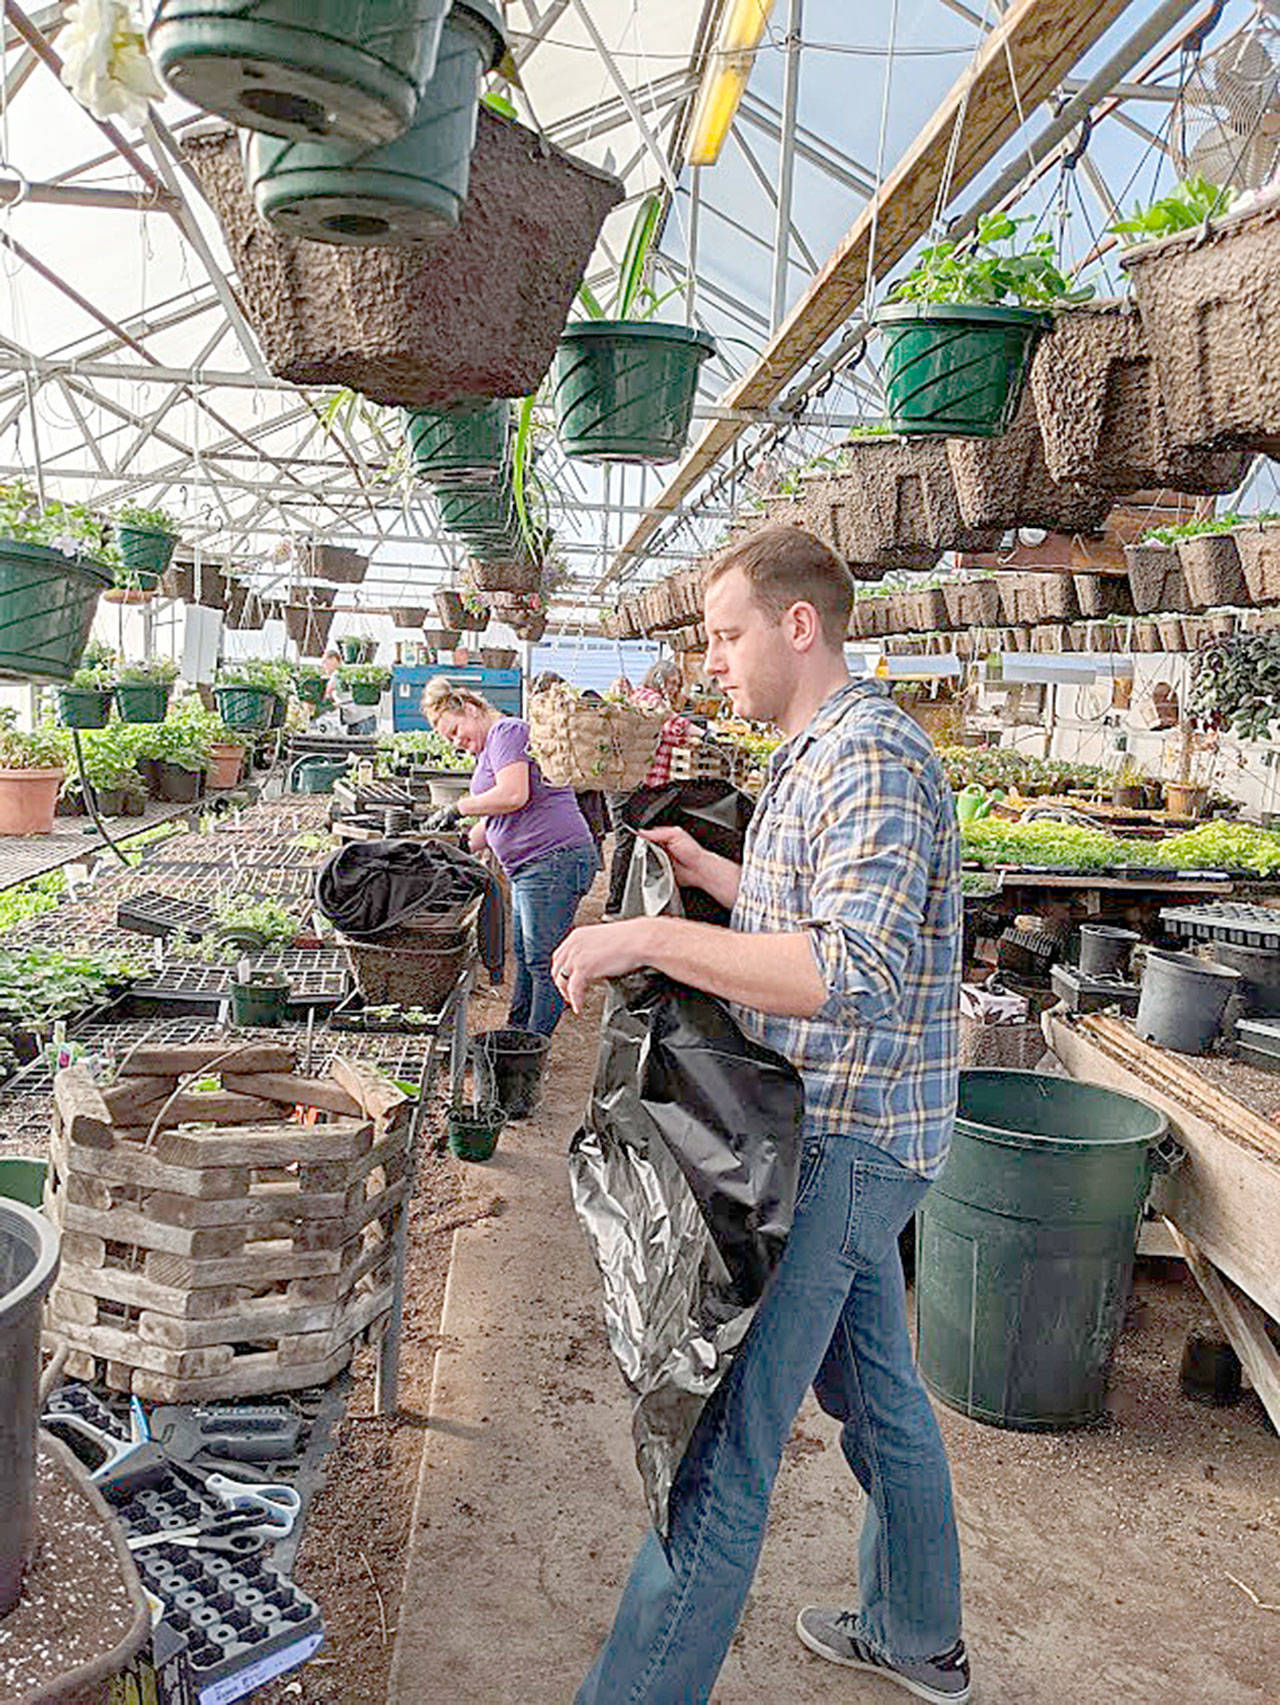 Sequim teachers Michelle Mahitka and Taylor Thorson help line flower baskets in the Sequim High School’s greenhouse to help finish the project started by Sequim High students. Prior to school closing due to COVID-19, students finished about 75 baskets while teachers and paraeducators completed more than 50 baskets after school closed, (Photo courtesy of Steve Mahitka)